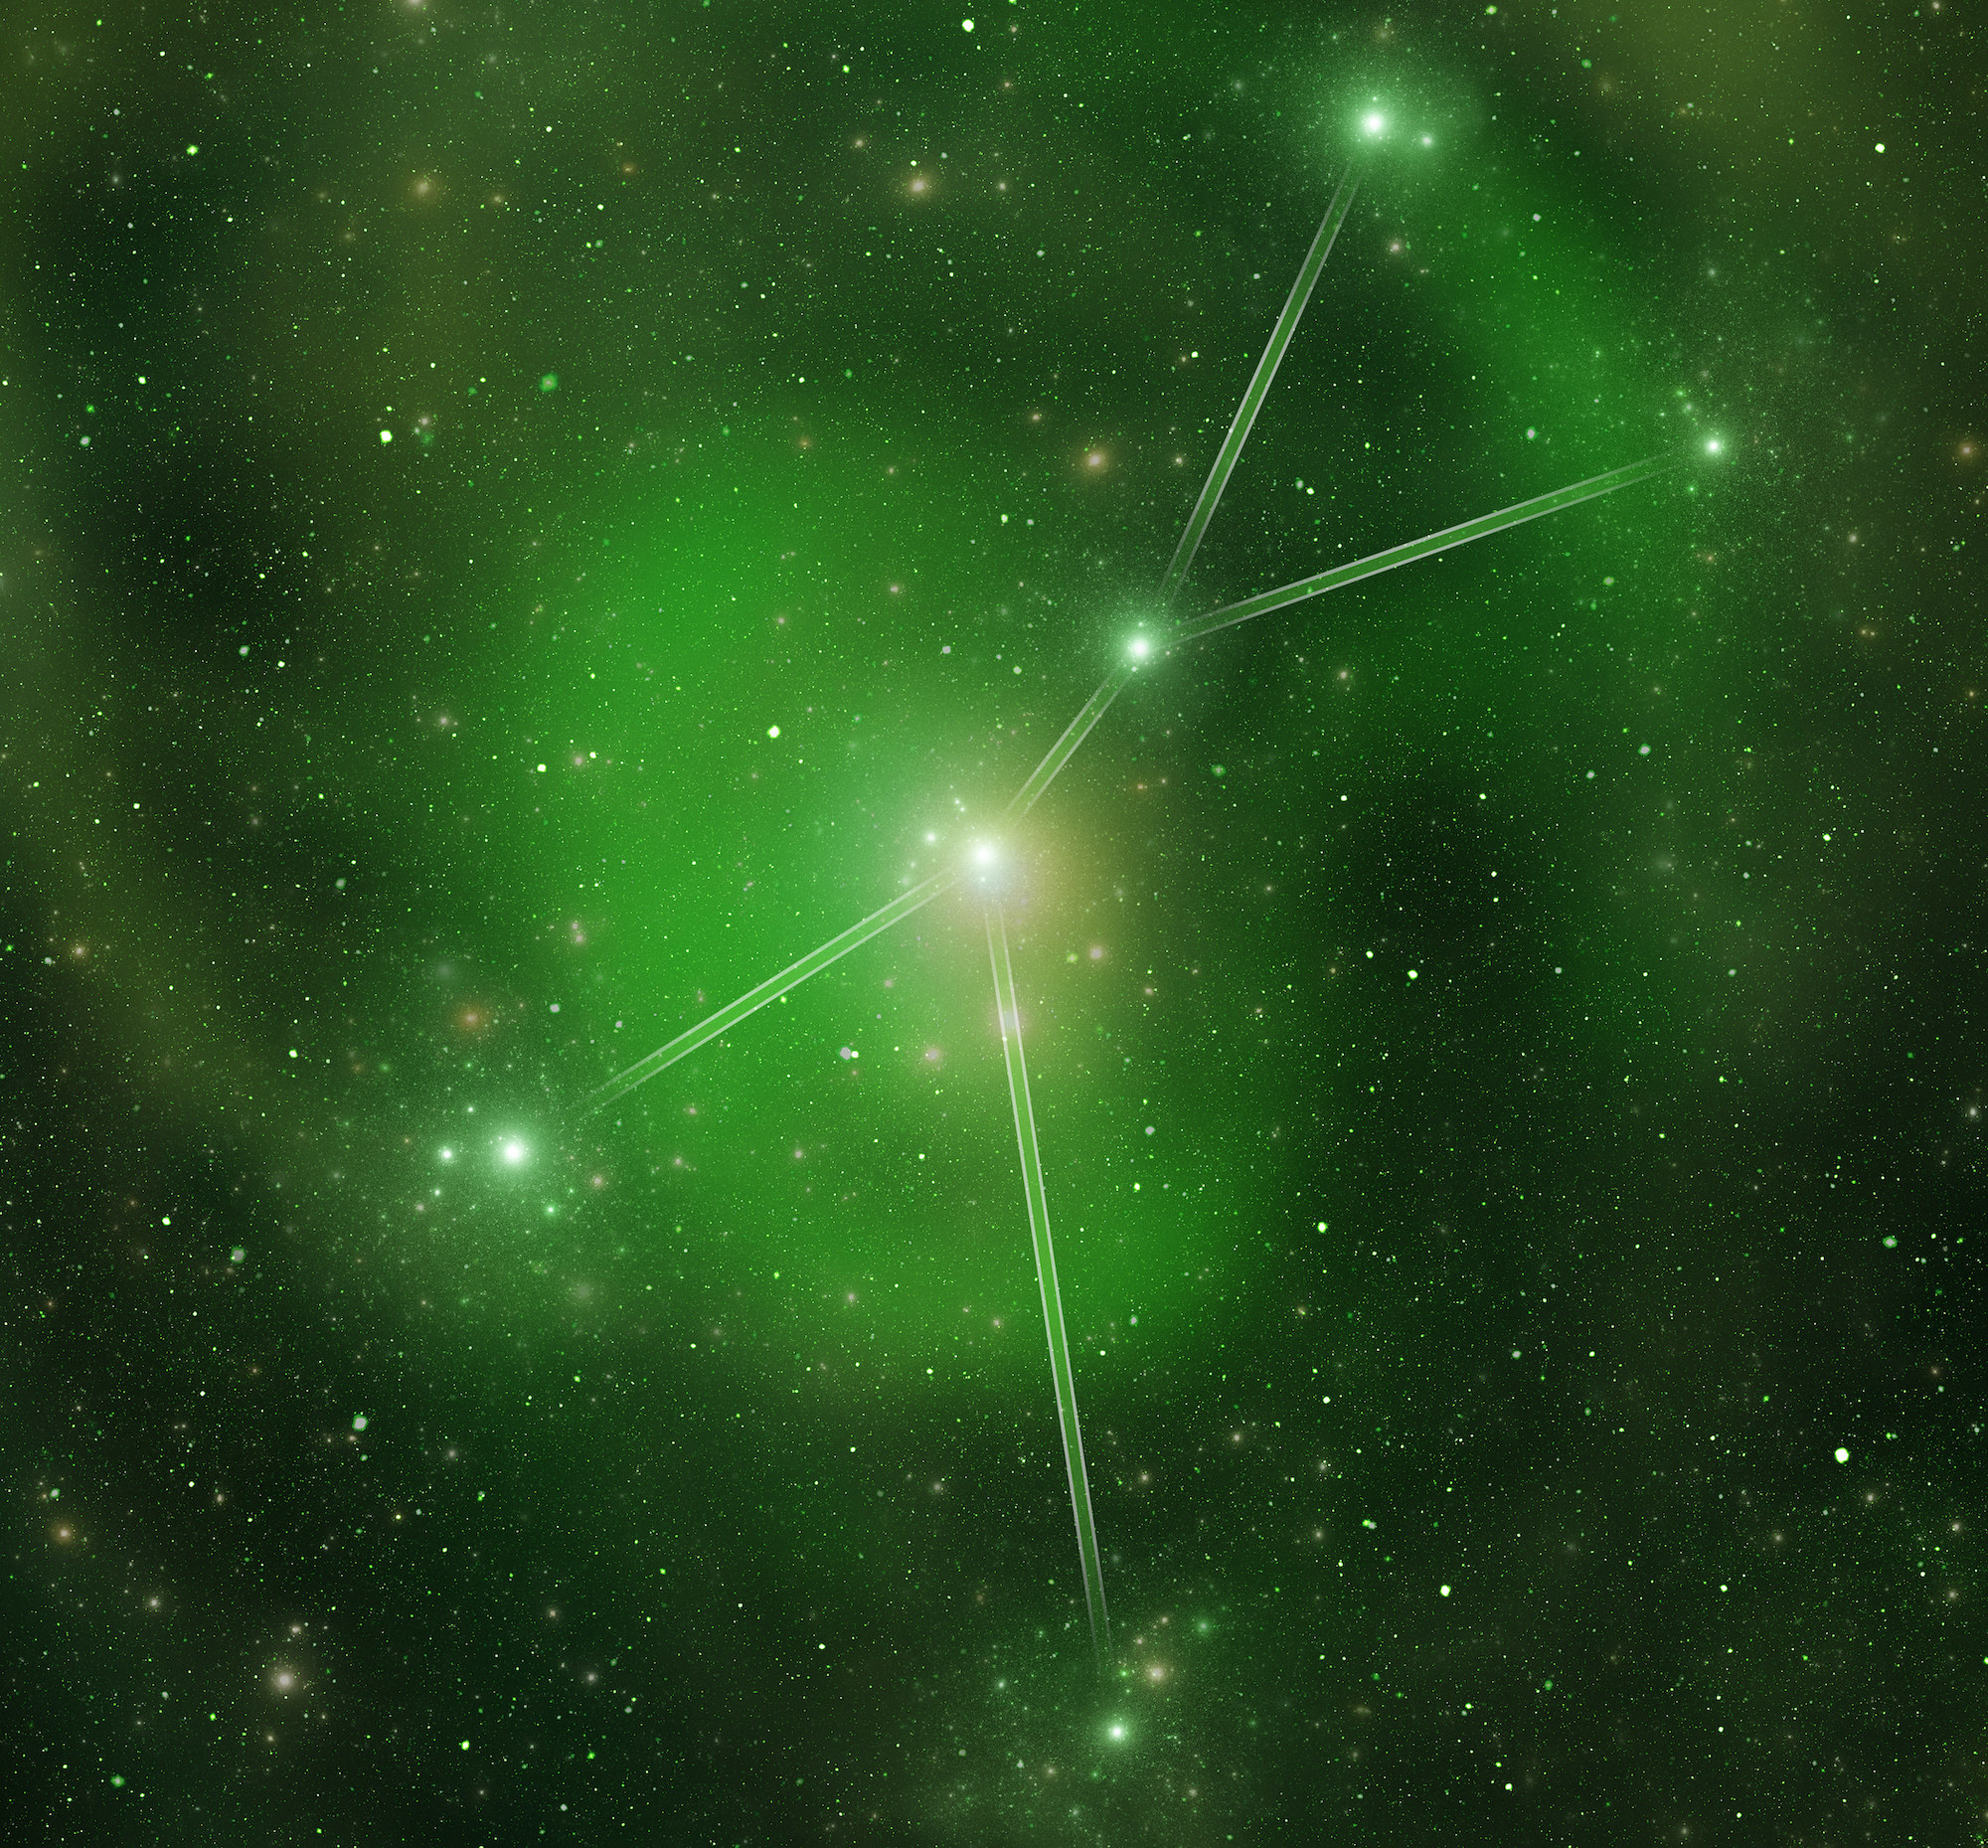 Schematic representation of the zodiacal constellation &quot;Cancer&quot;, green сolor corresponds to a zodiac sign.